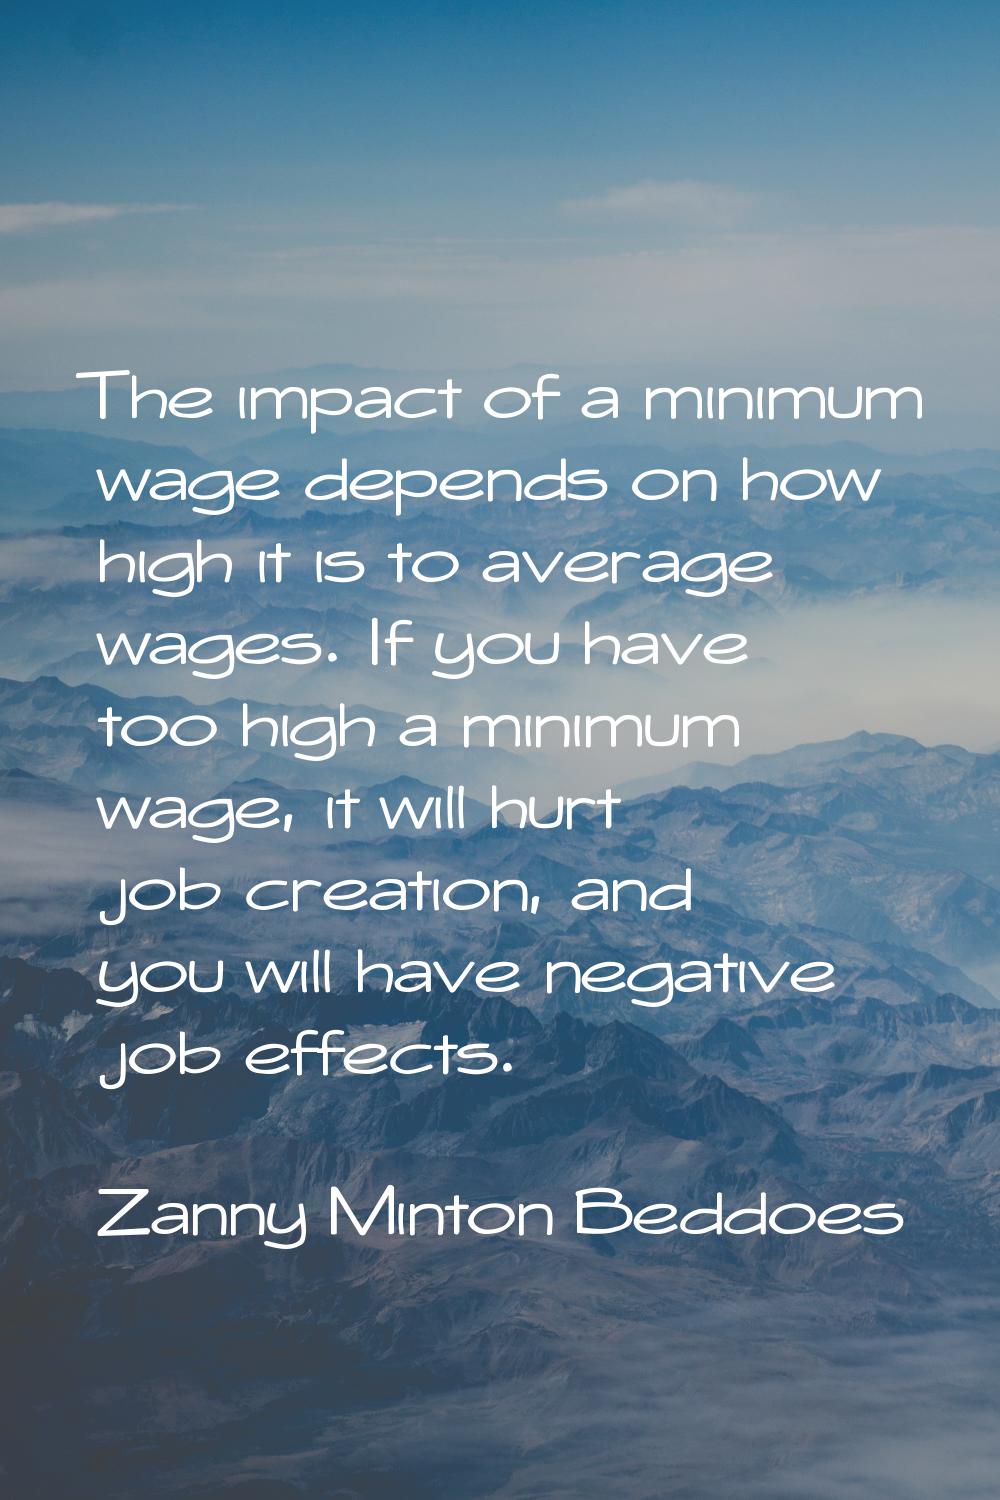 The impact of a minimum wage depends on how high it is to average wages. If you have too high a min